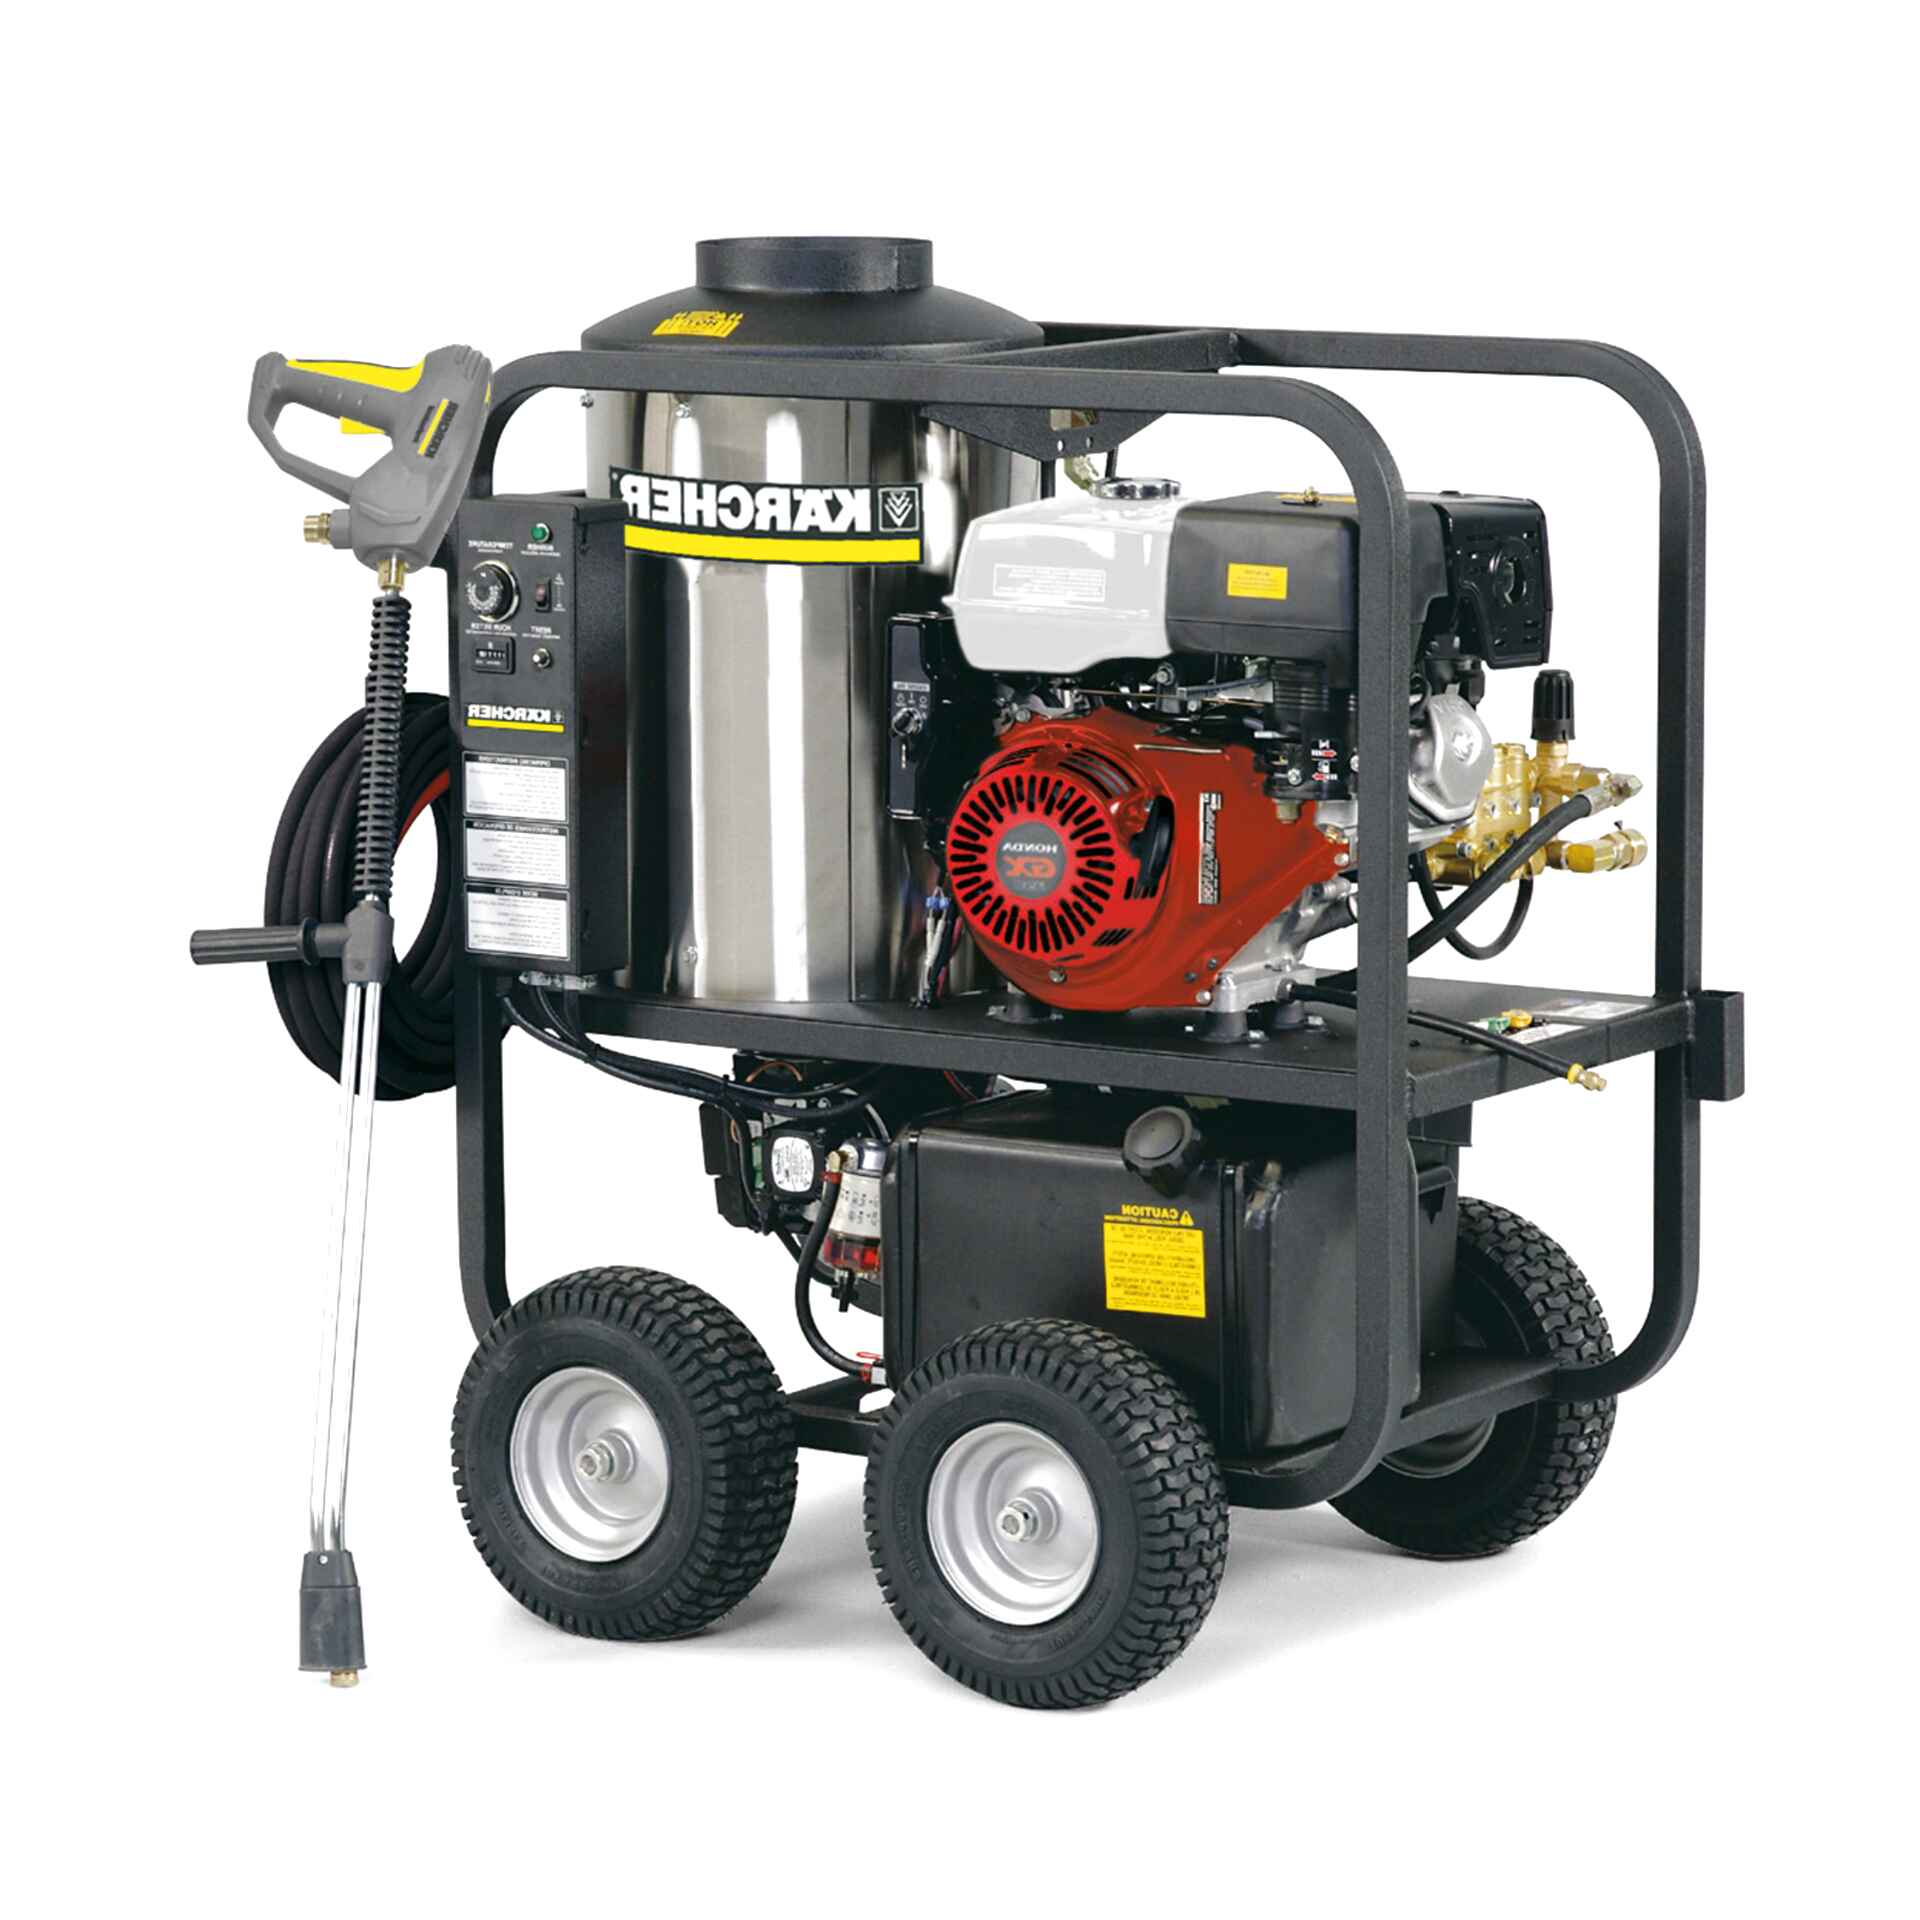 Commercial Pressure Washer For Sale In Nc